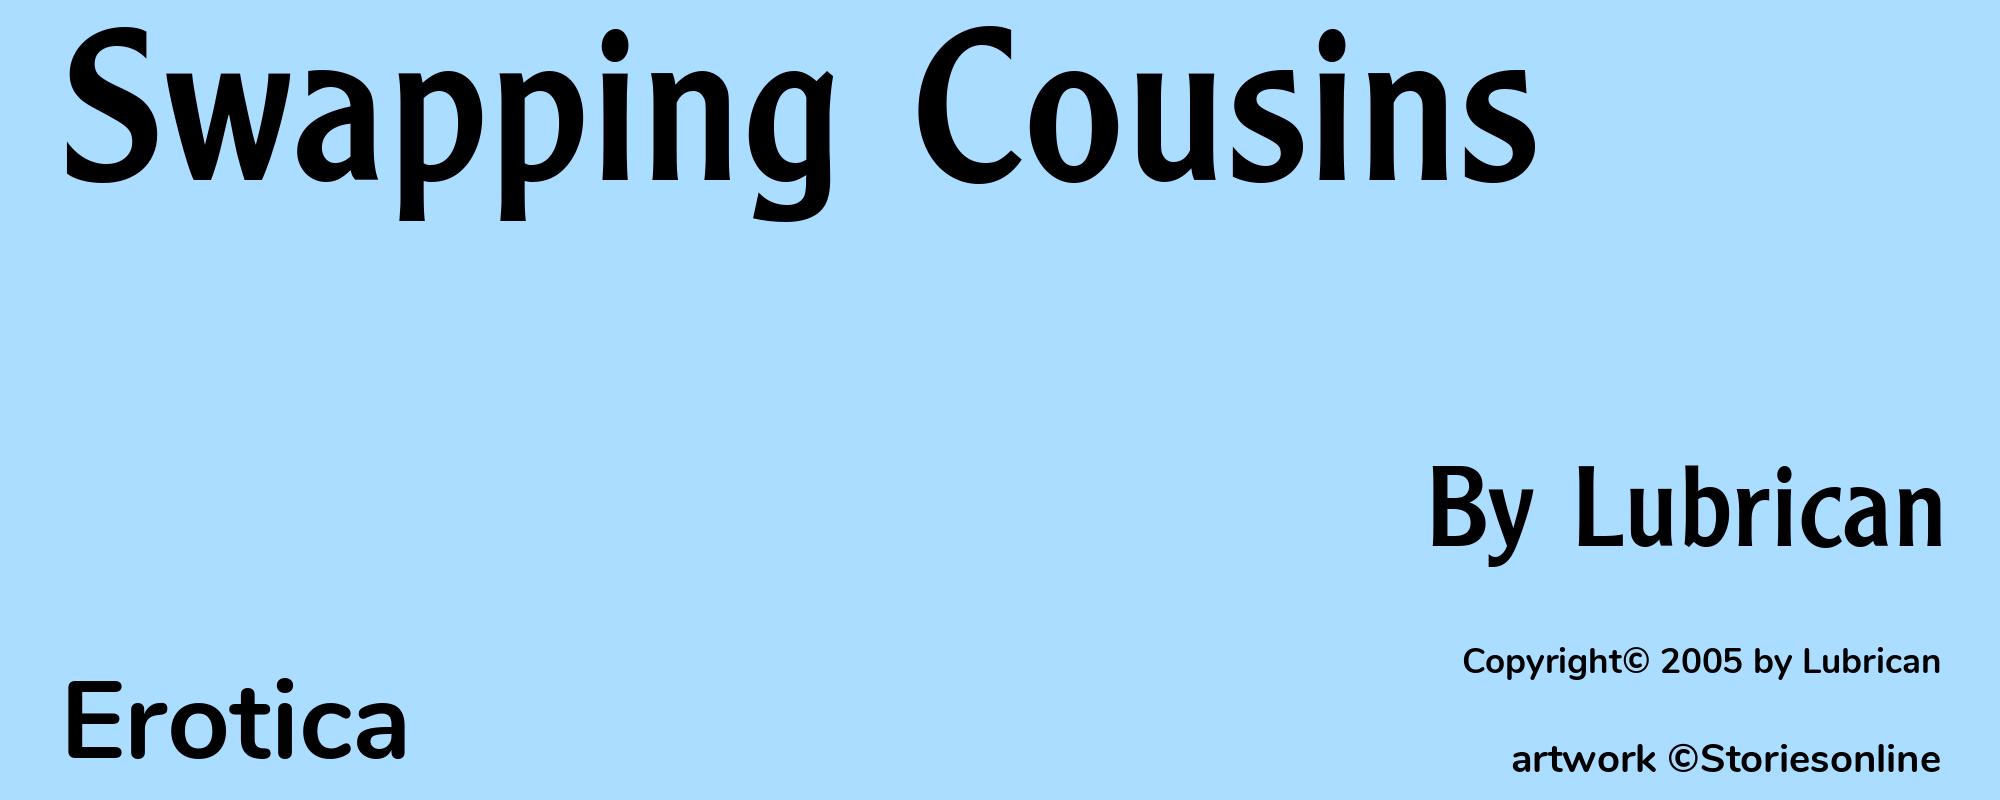 Swapping Cousins - Cover